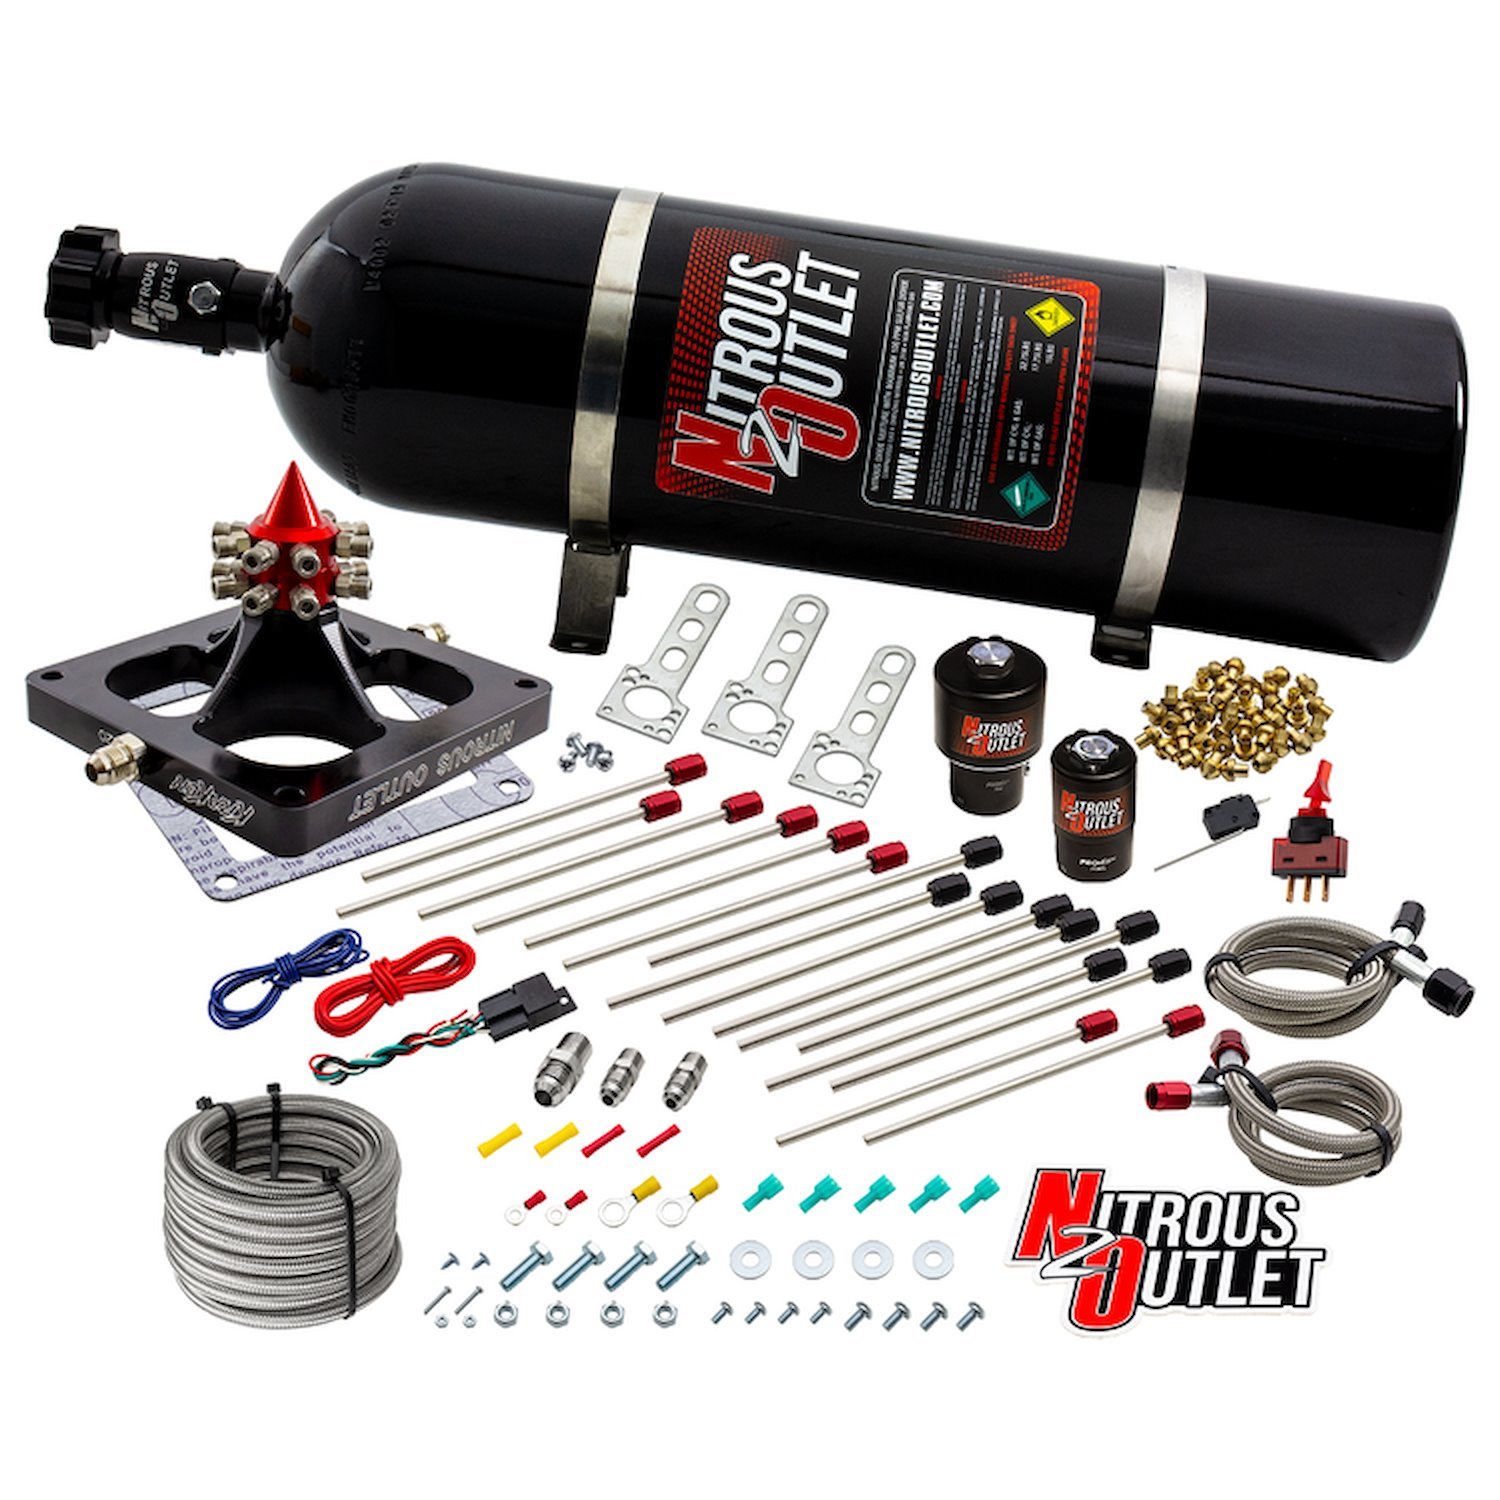 00-459002CS-15 4500 Kraken Competition System, Braided Hose/.189 Competition Trashcan Nitrous Solenoid/.310 Fuel Solenoid